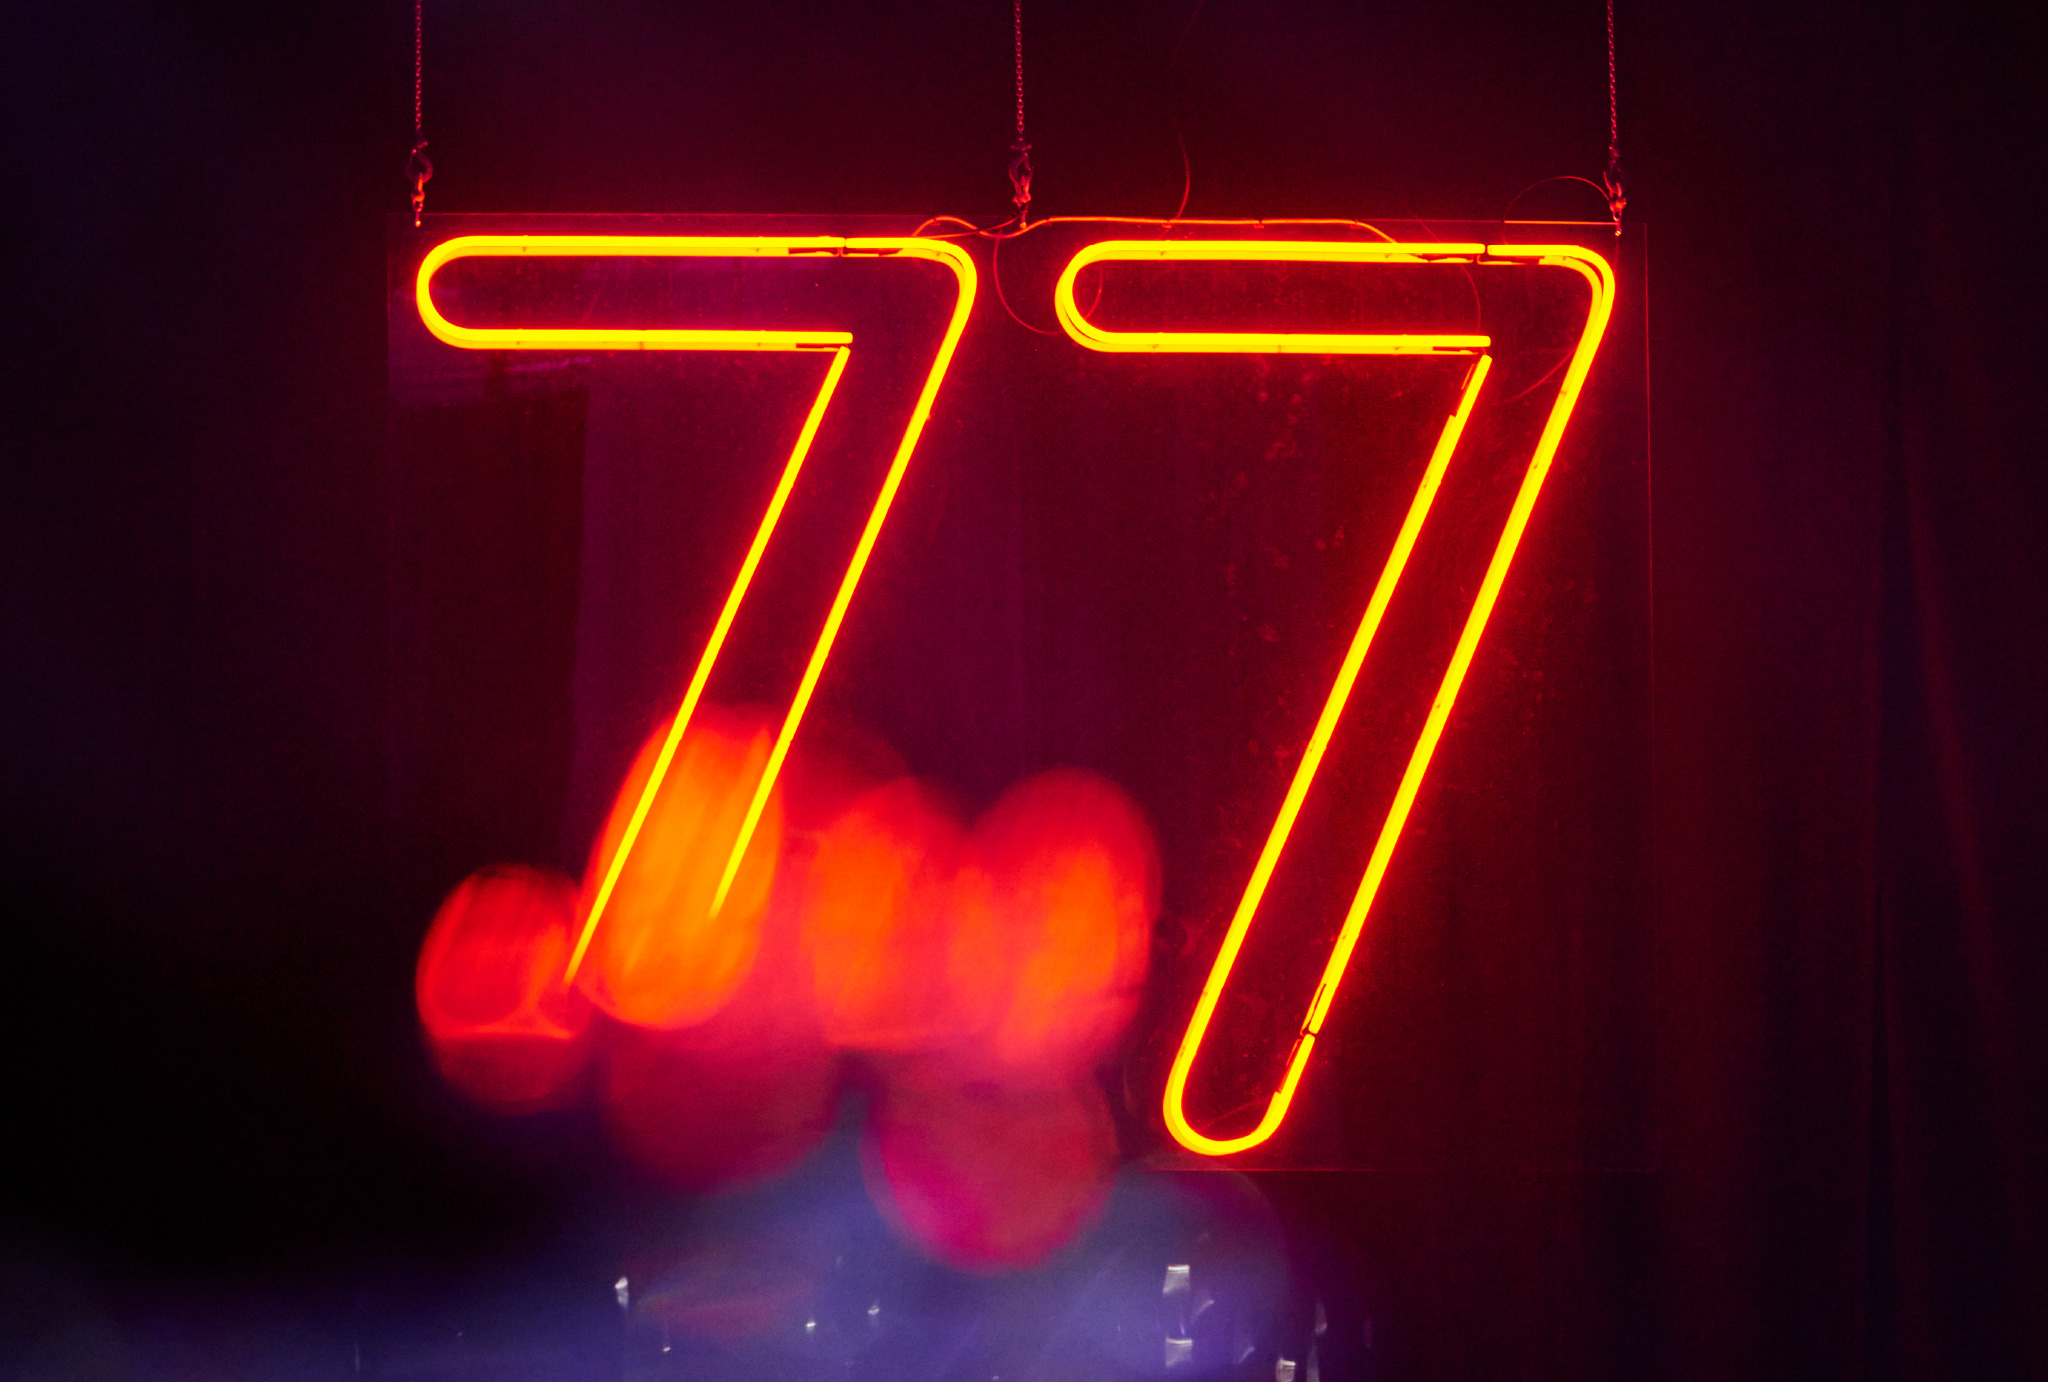 orange neon lights forming the number 77 on a dark blue background with some red light spots